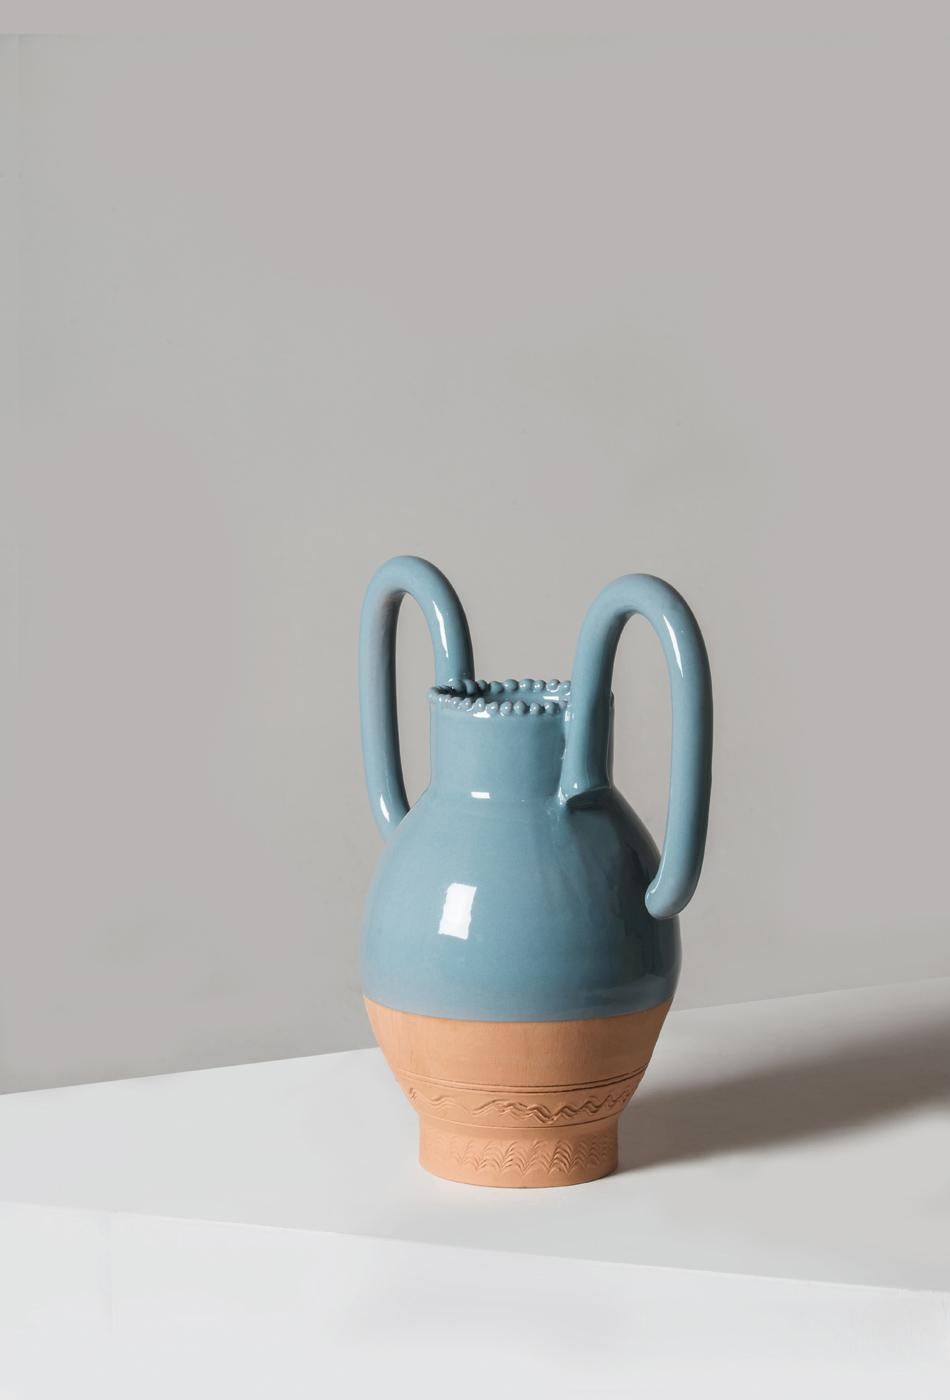 Following on a series of vases made with Mexican artisans, Sam Baron continues his exploration into what makes an object belong to a certain territory. Langiu (tall) Vase and Cruciu (short) Vase are two versions of the humble terracotta water jug